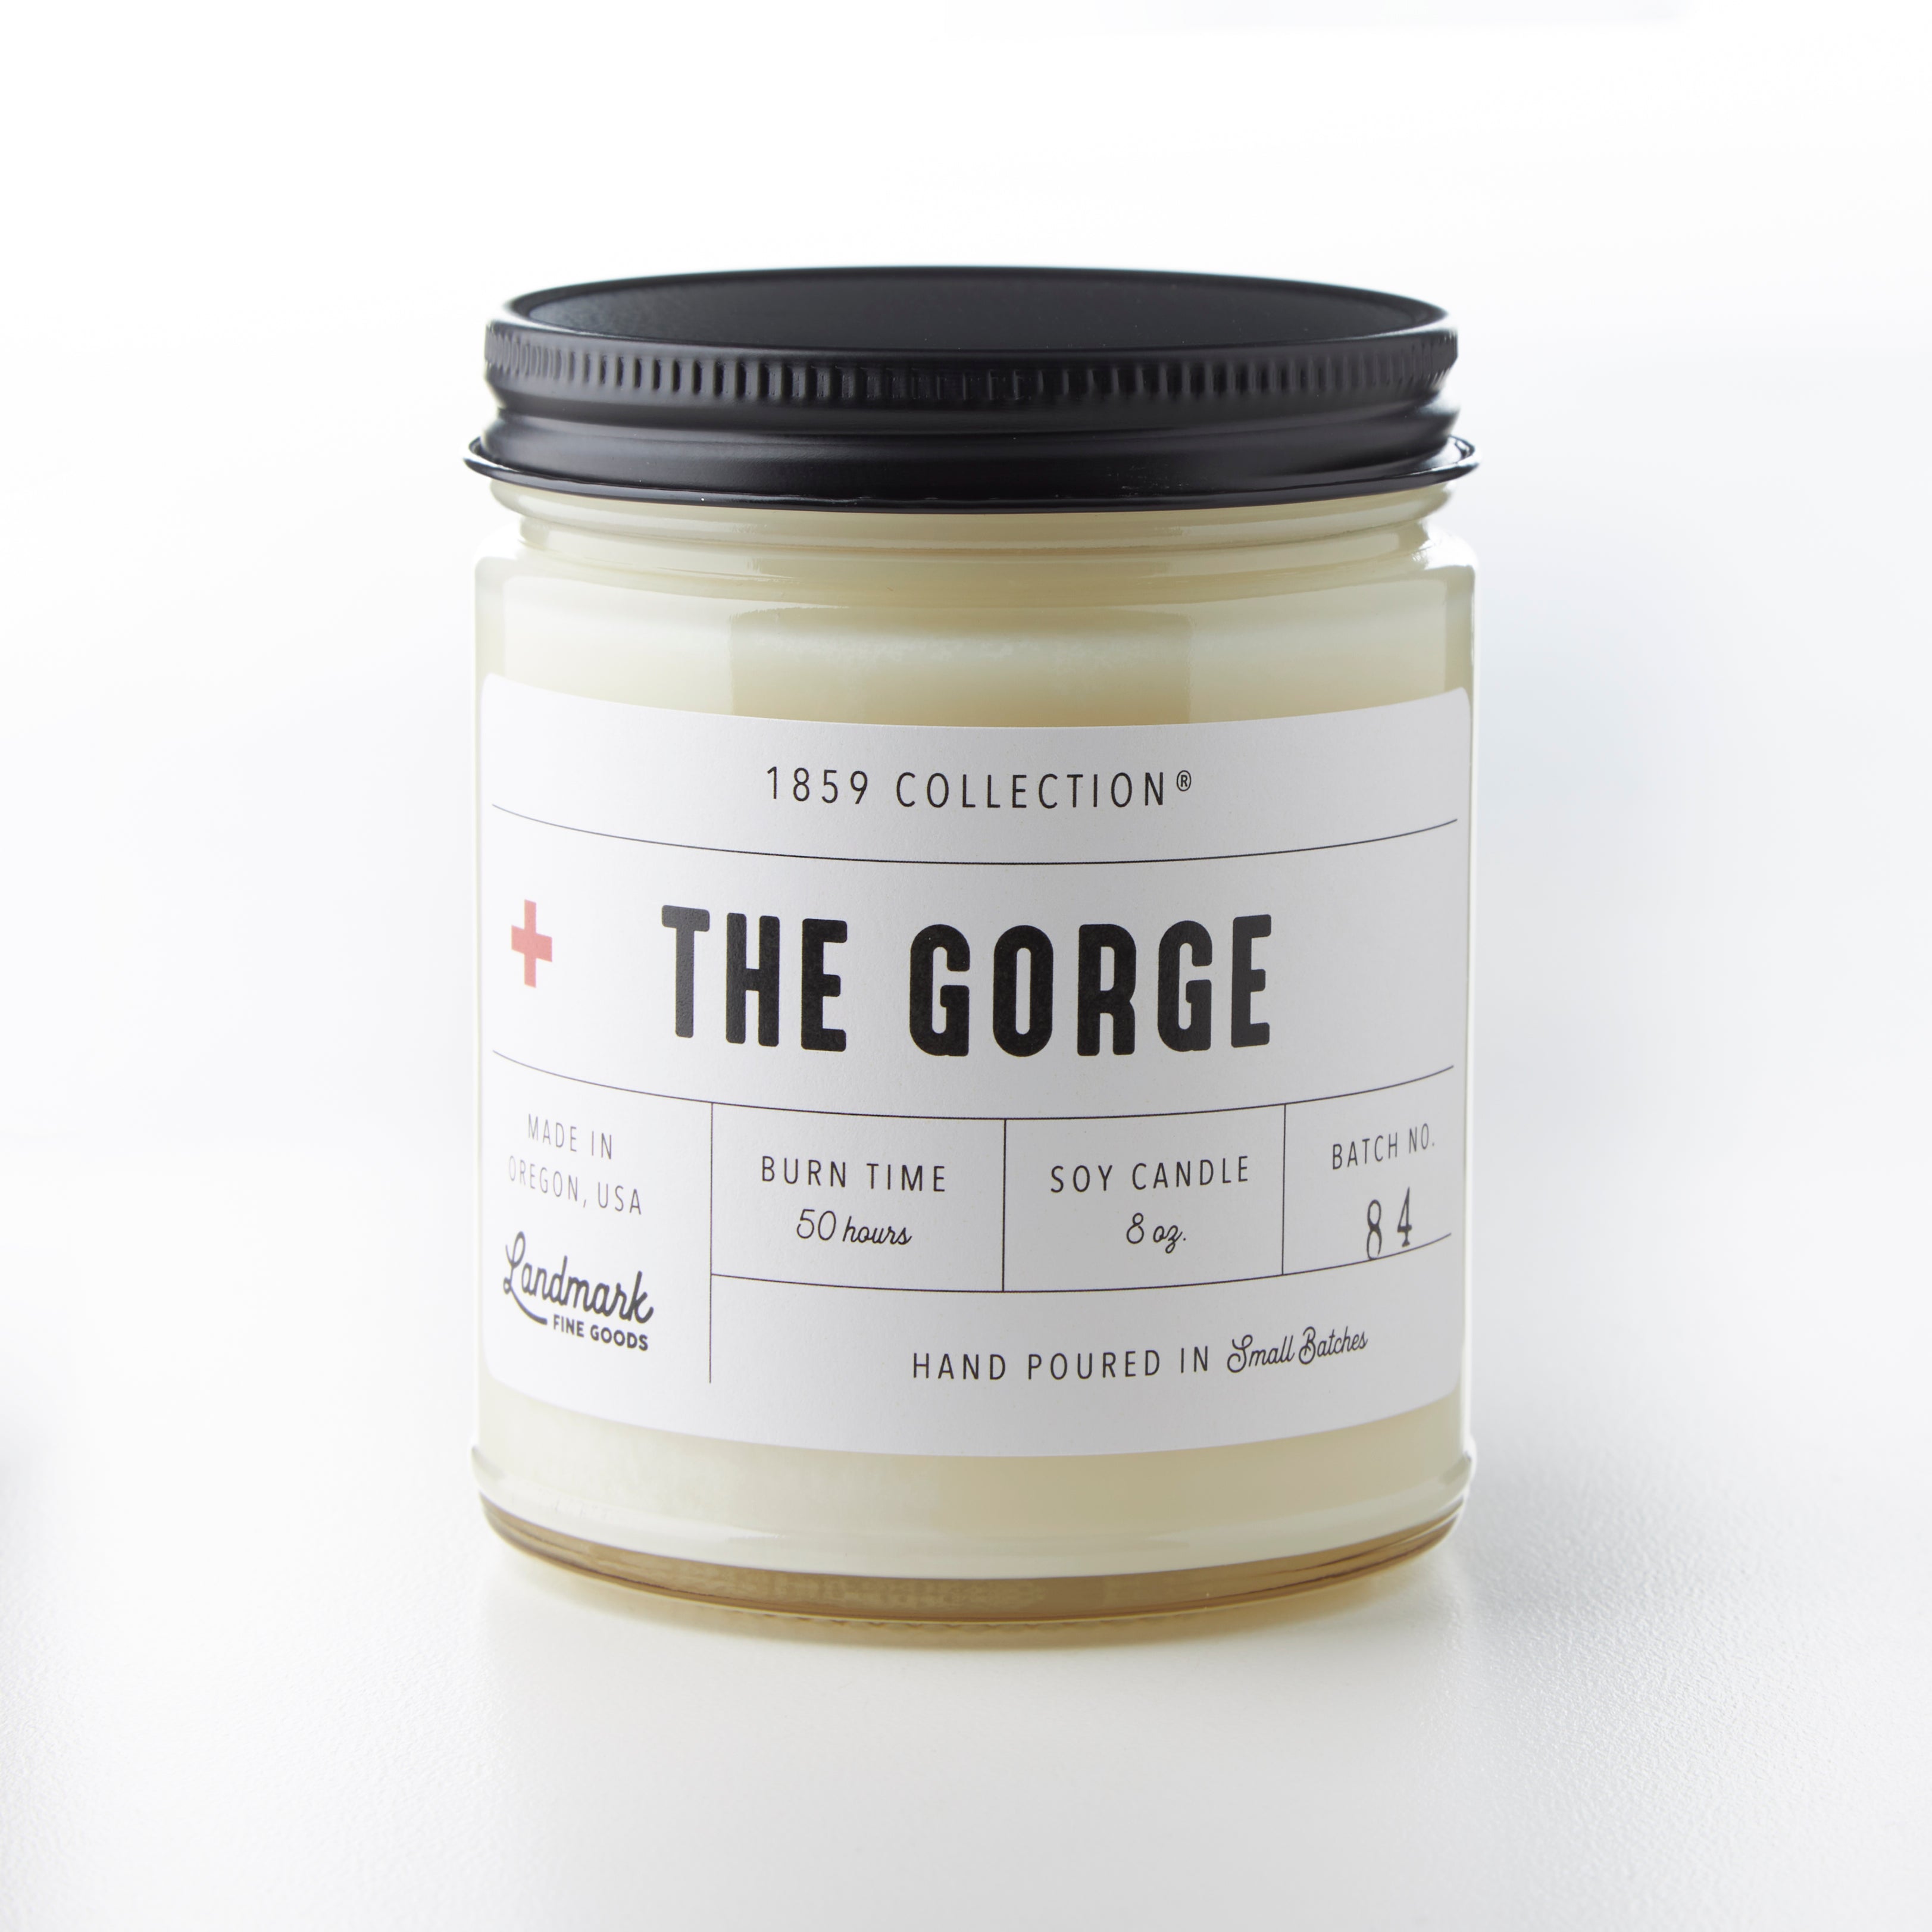 The Gorge Candle - 1859 Collection®